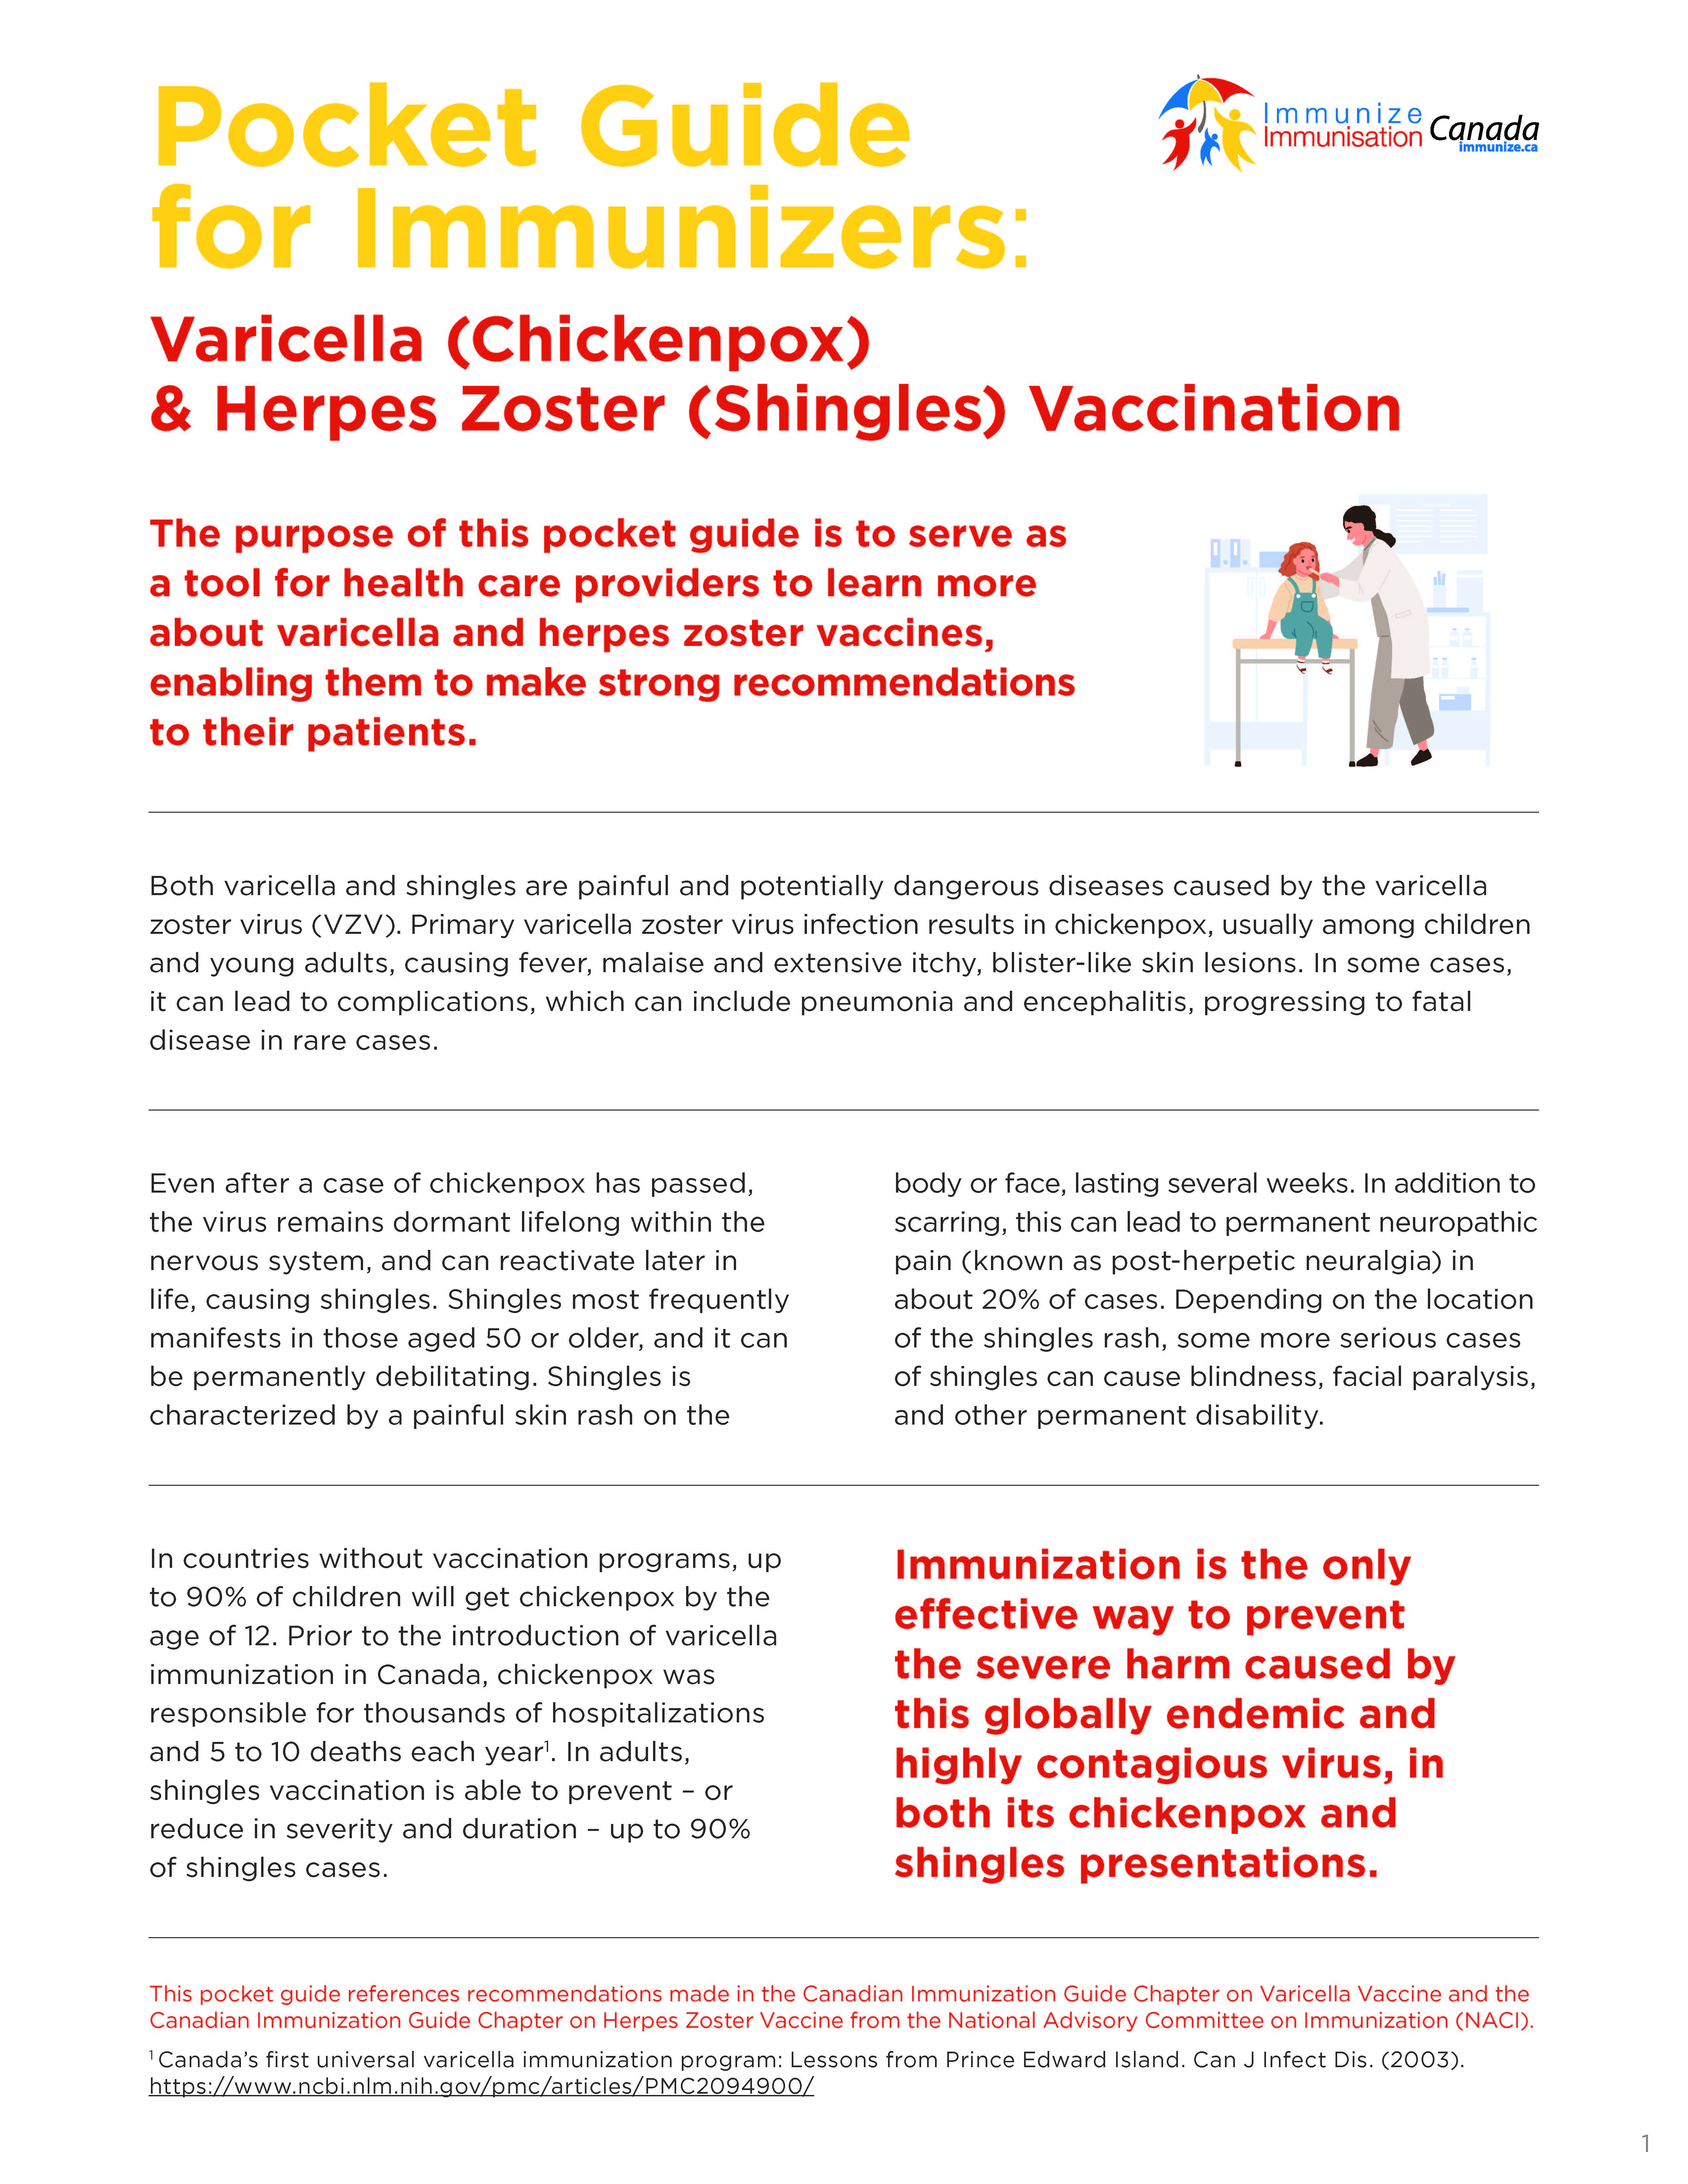 Pocket Guide for Immunizers: Varicella (Chickenpox) & Herpes Zoster (Shingles) Vaccination